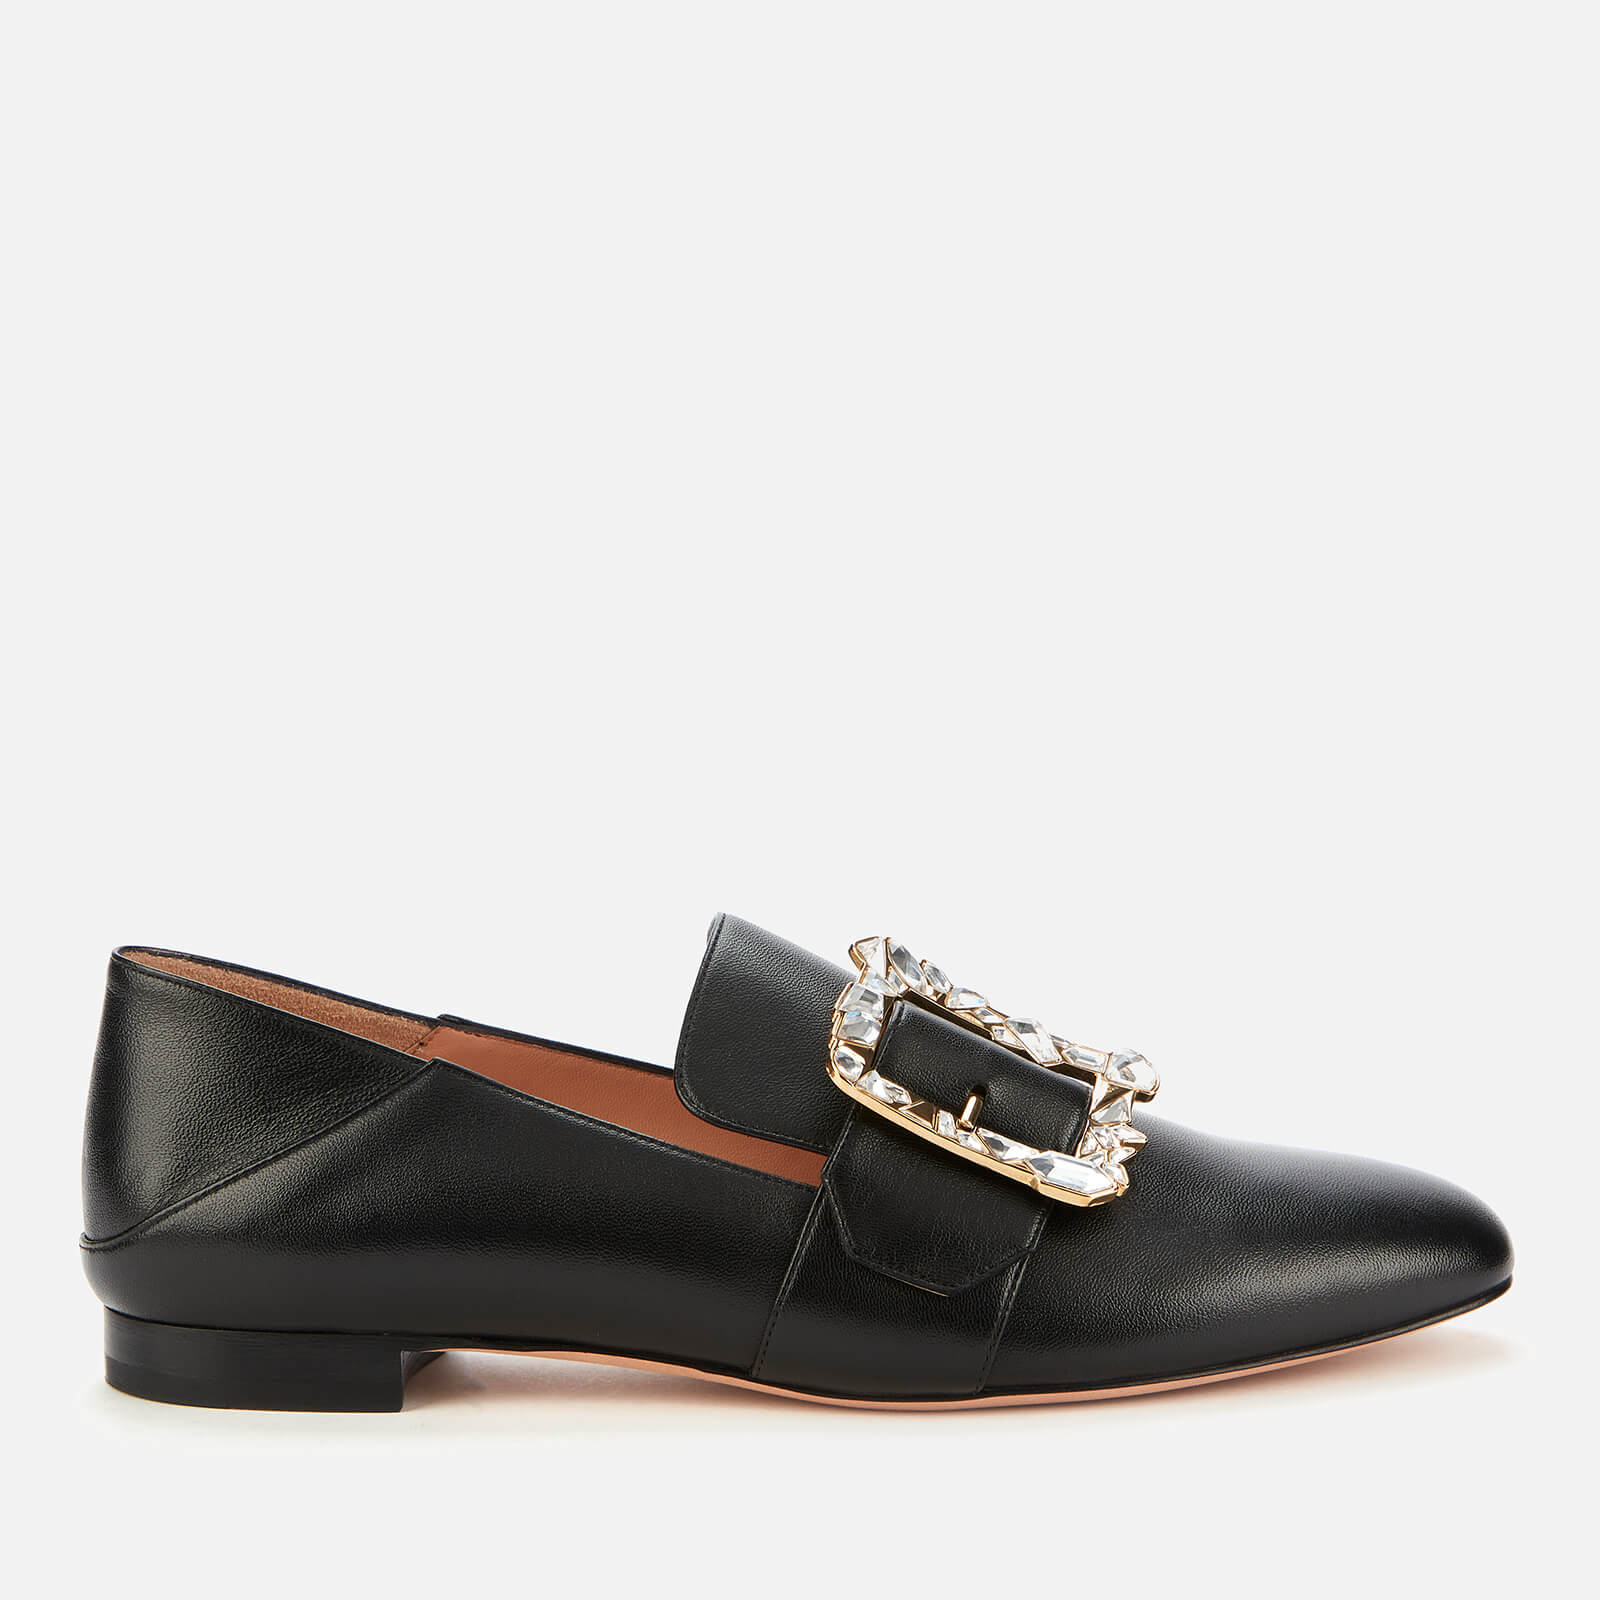 Bally Women's Janelle-Stra Leather Loafers - Black - UK 3